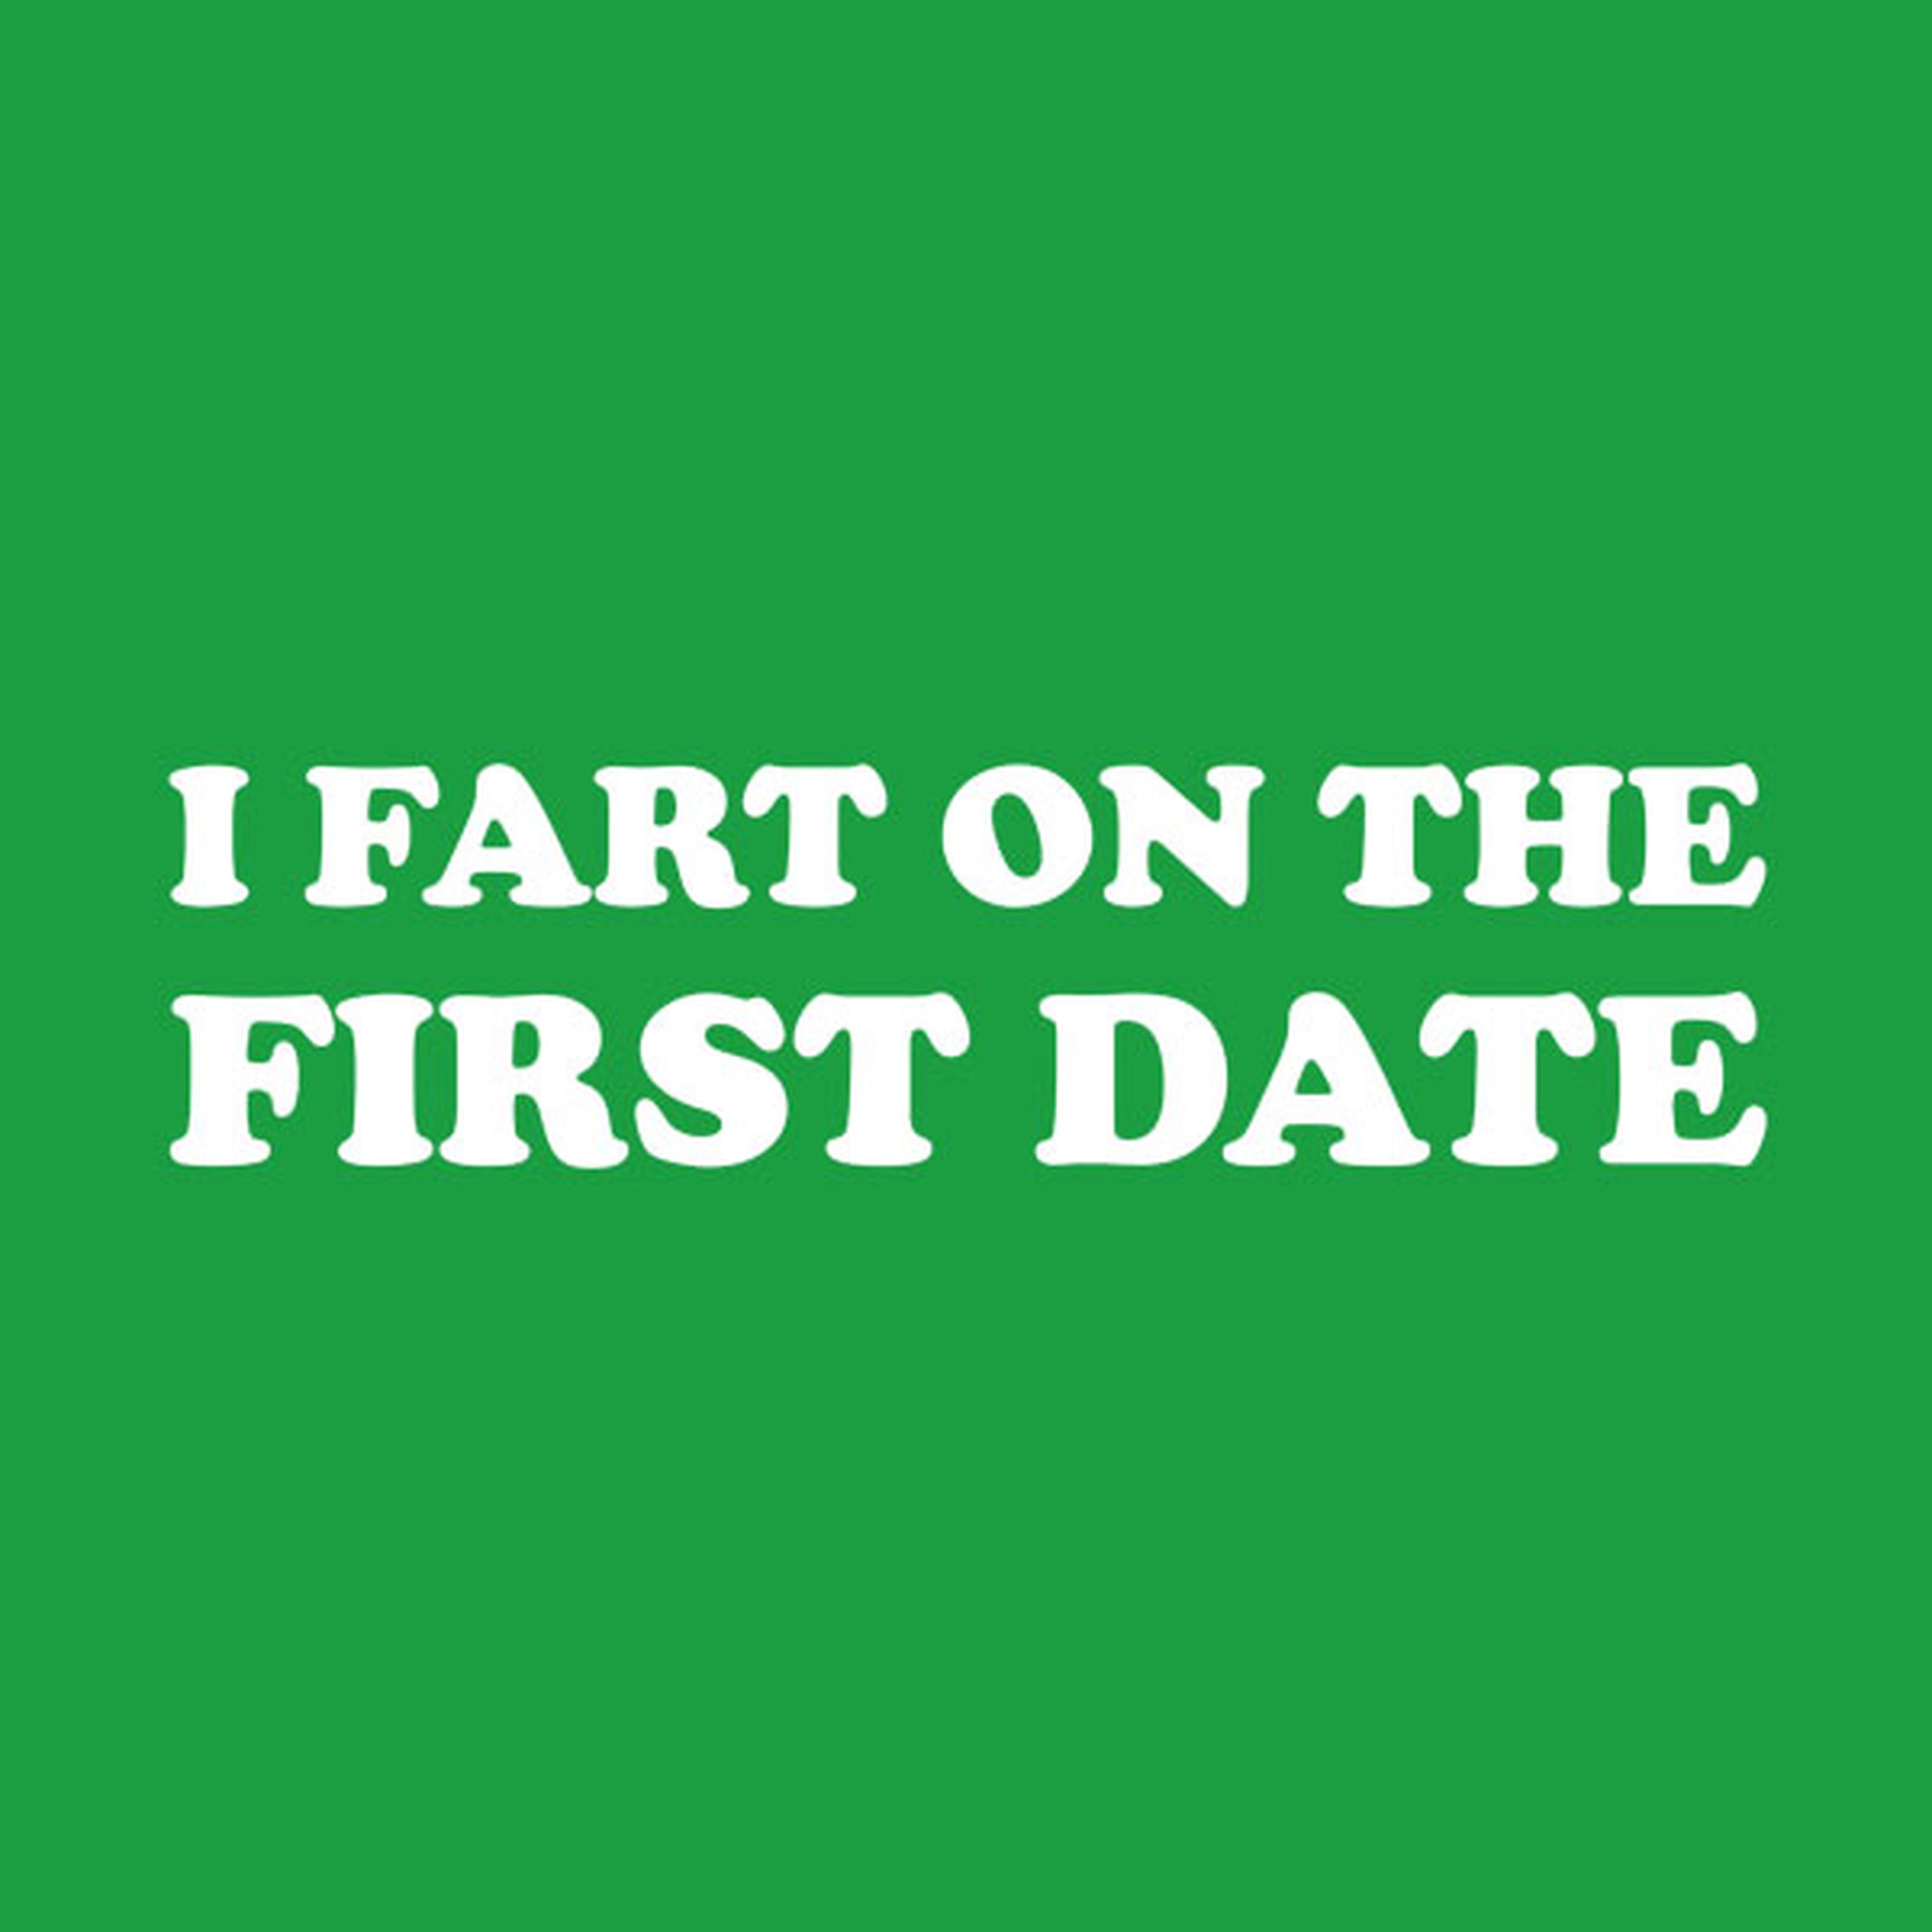 I fart on the first date - T-shirt